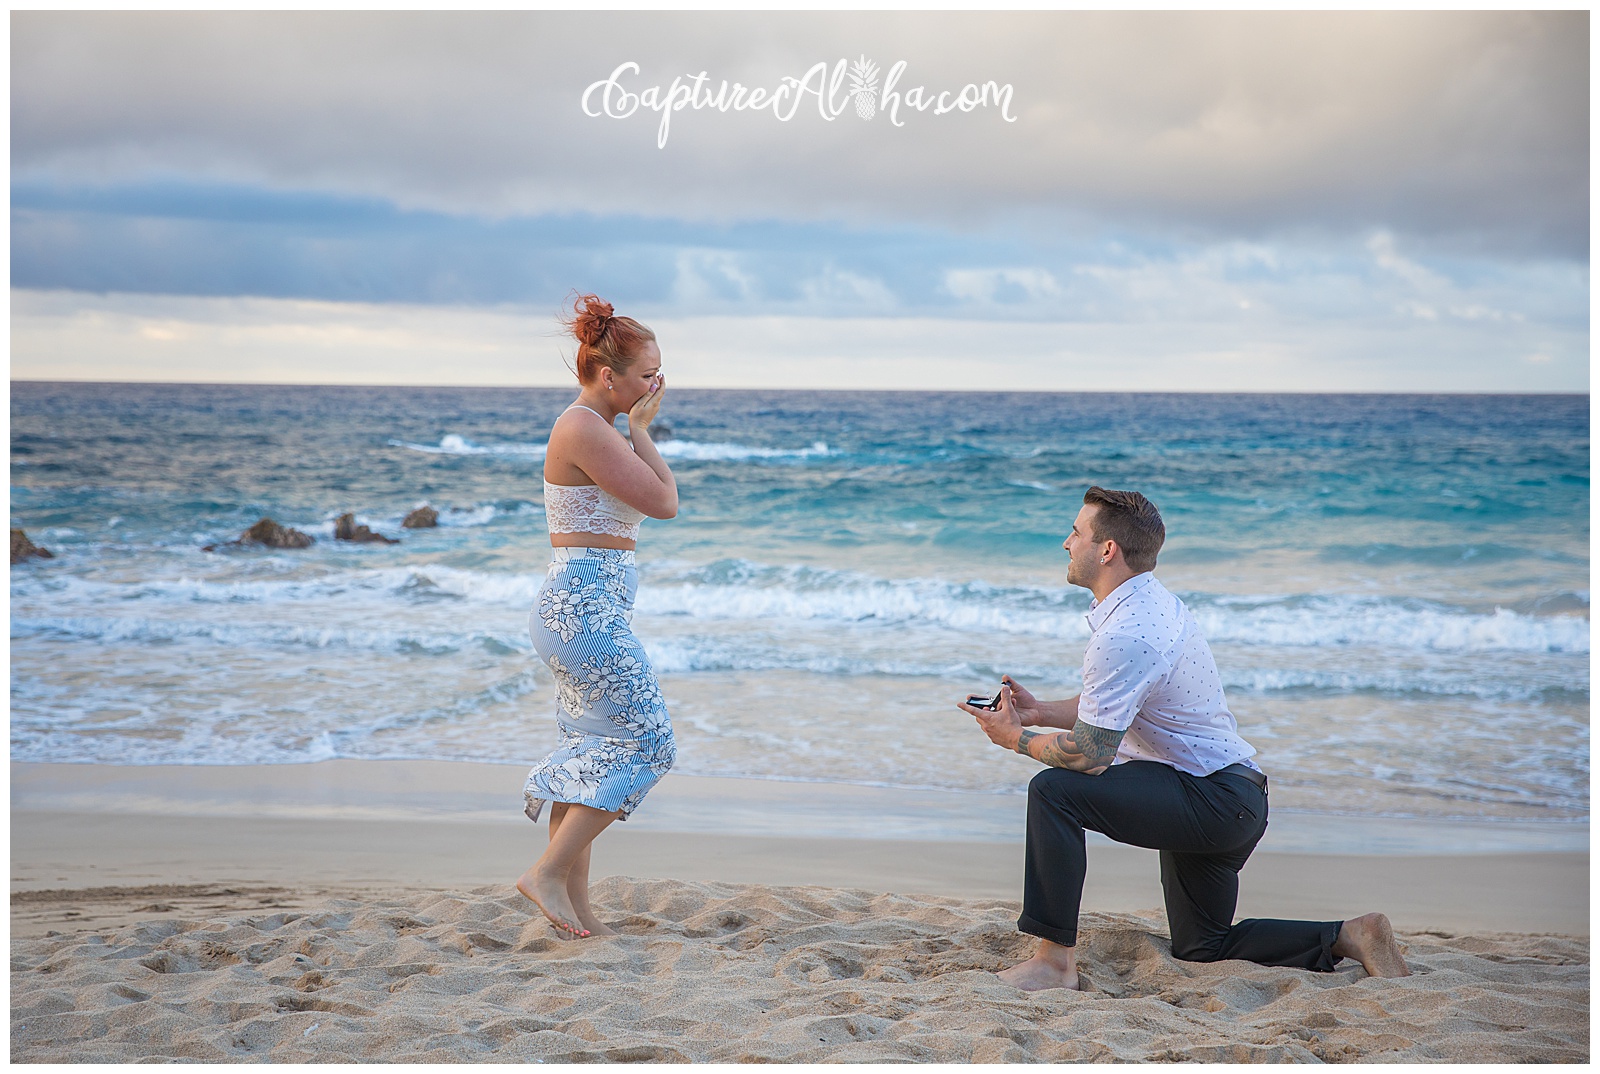 Maui Surprise Proposal Photography at Ironwoods Beach at Sunset, he's down on one knee